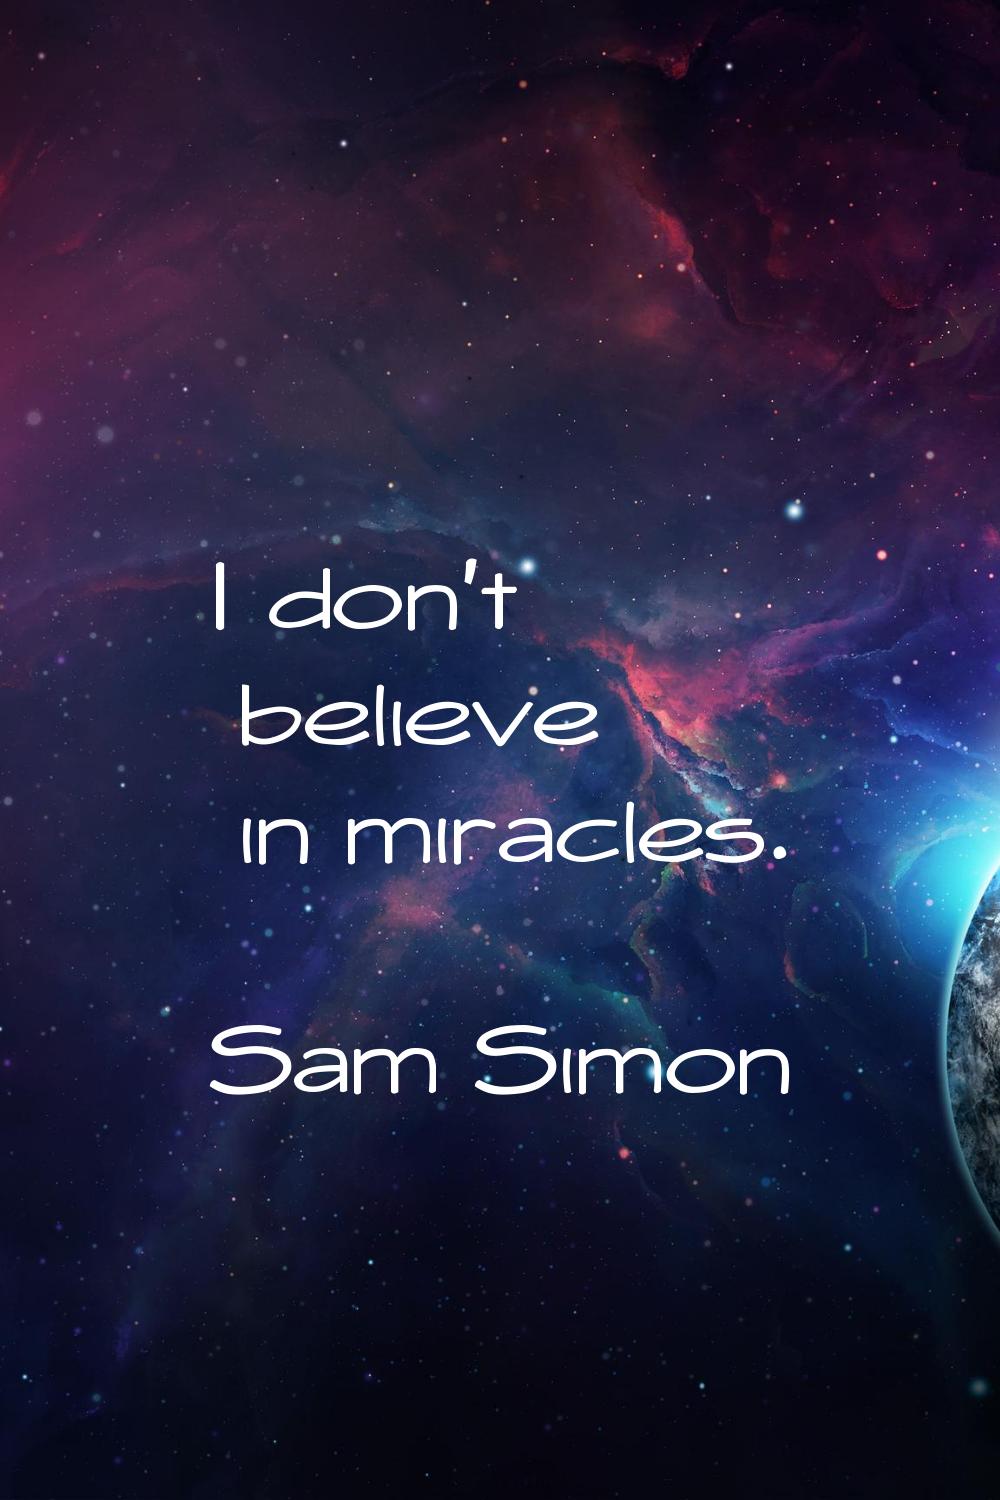 I don't believe in miracles.